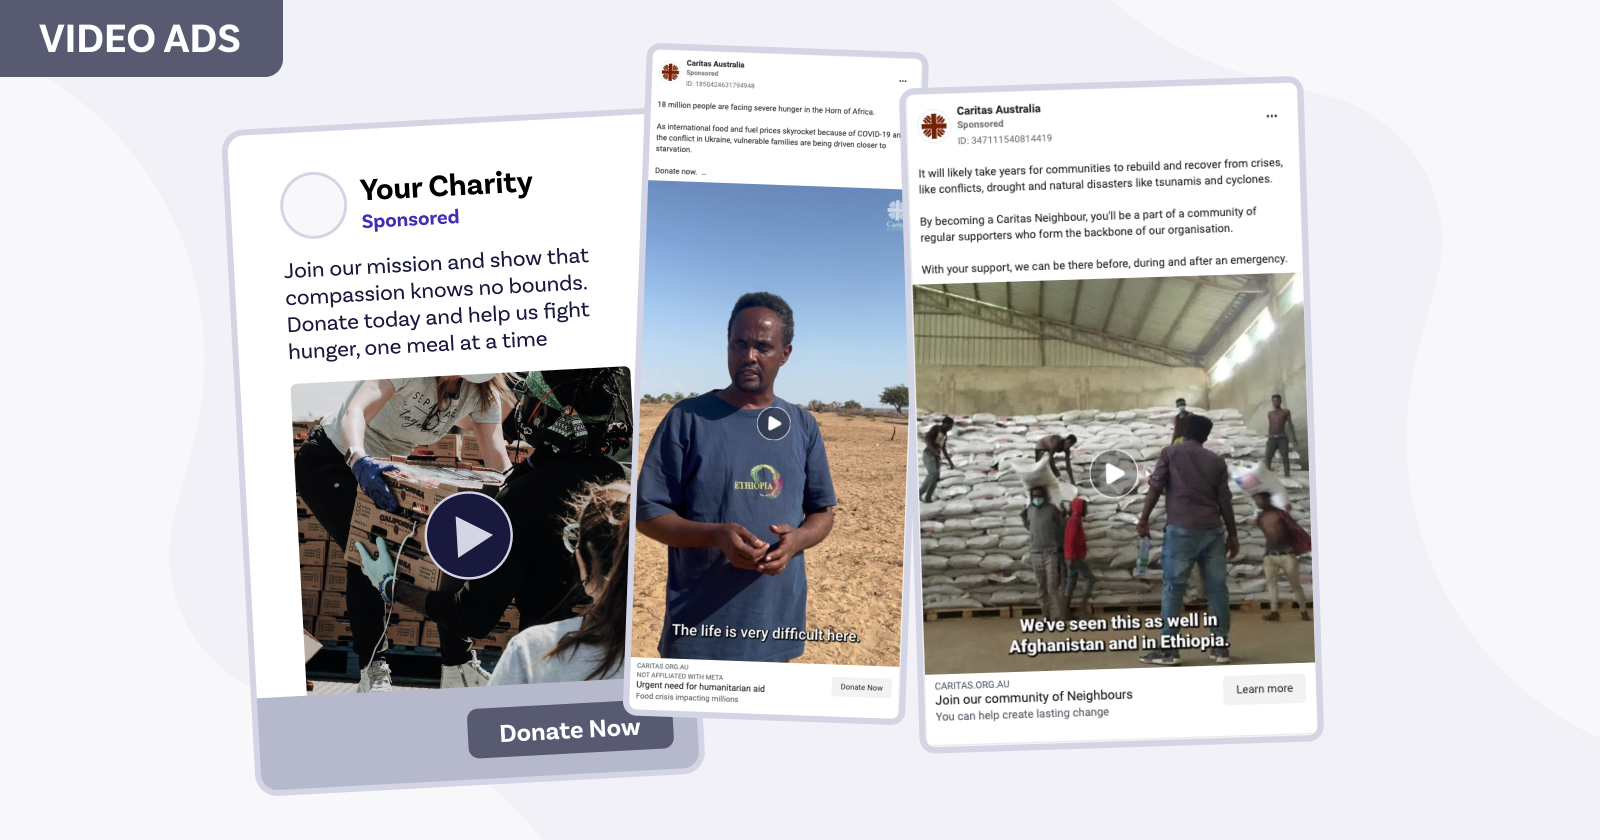 How to use Facebook Ads for Fundraising: Five Tips for a Successful Campaign